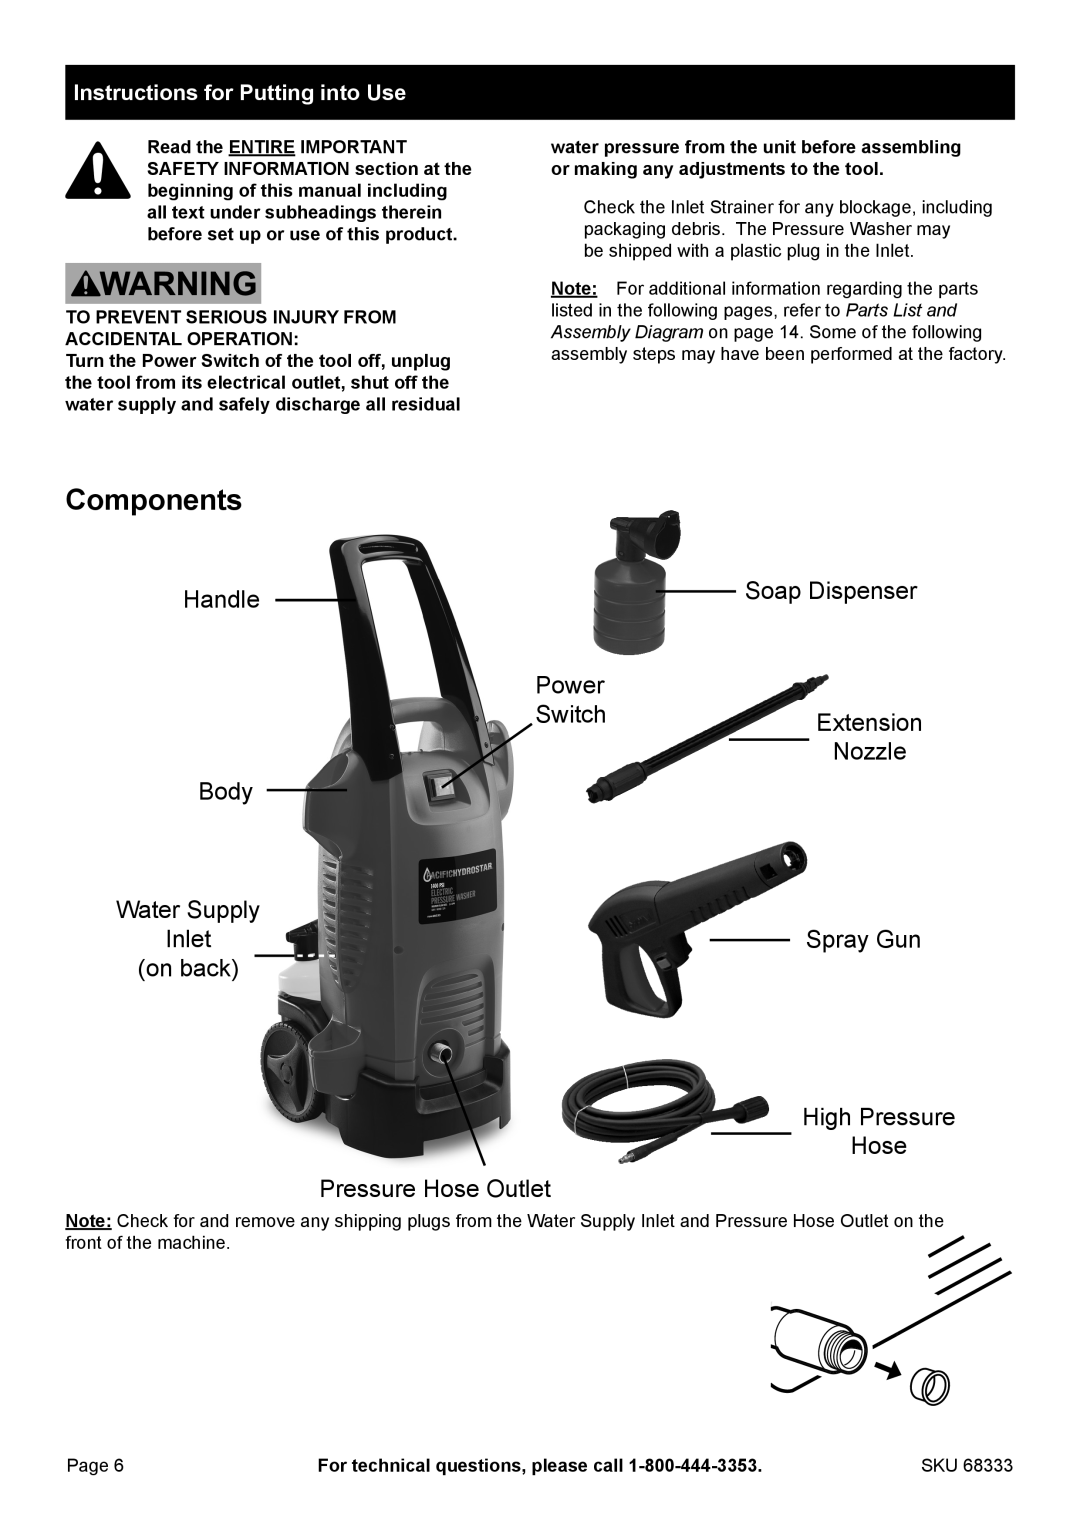 Harbor Freight Tools 68333 Components, Instructions for Putting into Use, Handle, High Pressure Hose Pressure Hose Outlet 